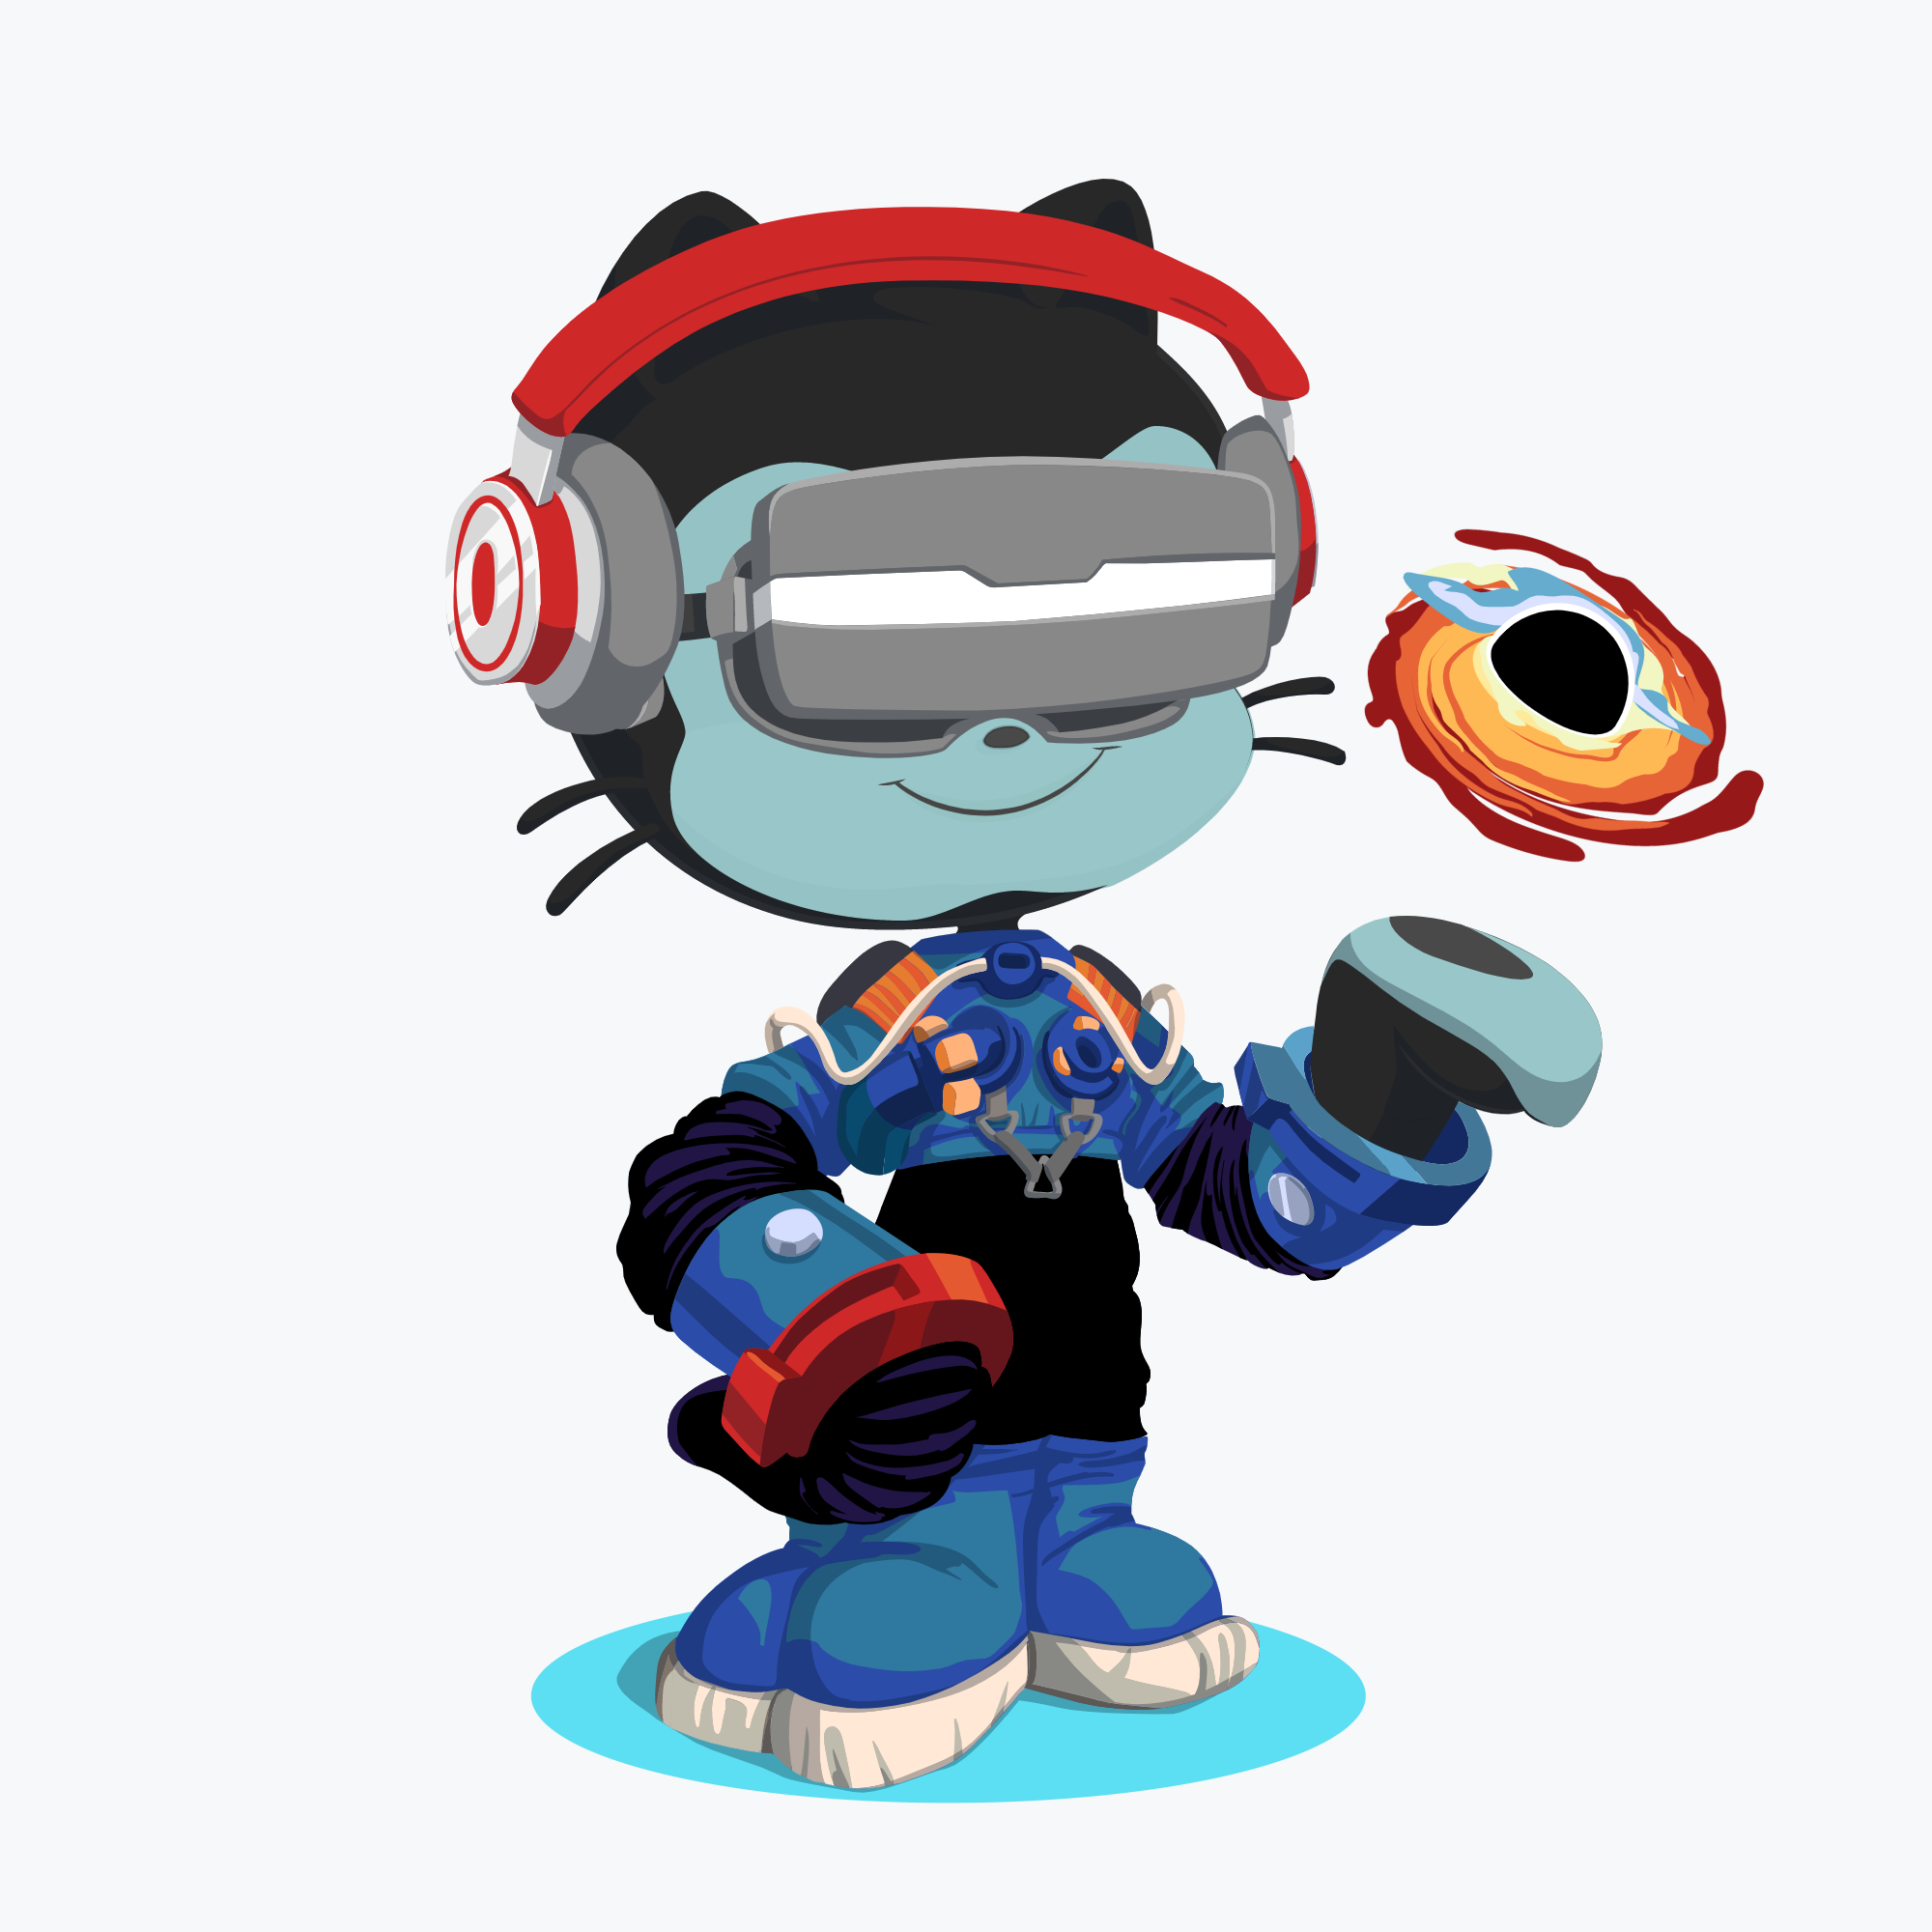 Image of personalized Octocat